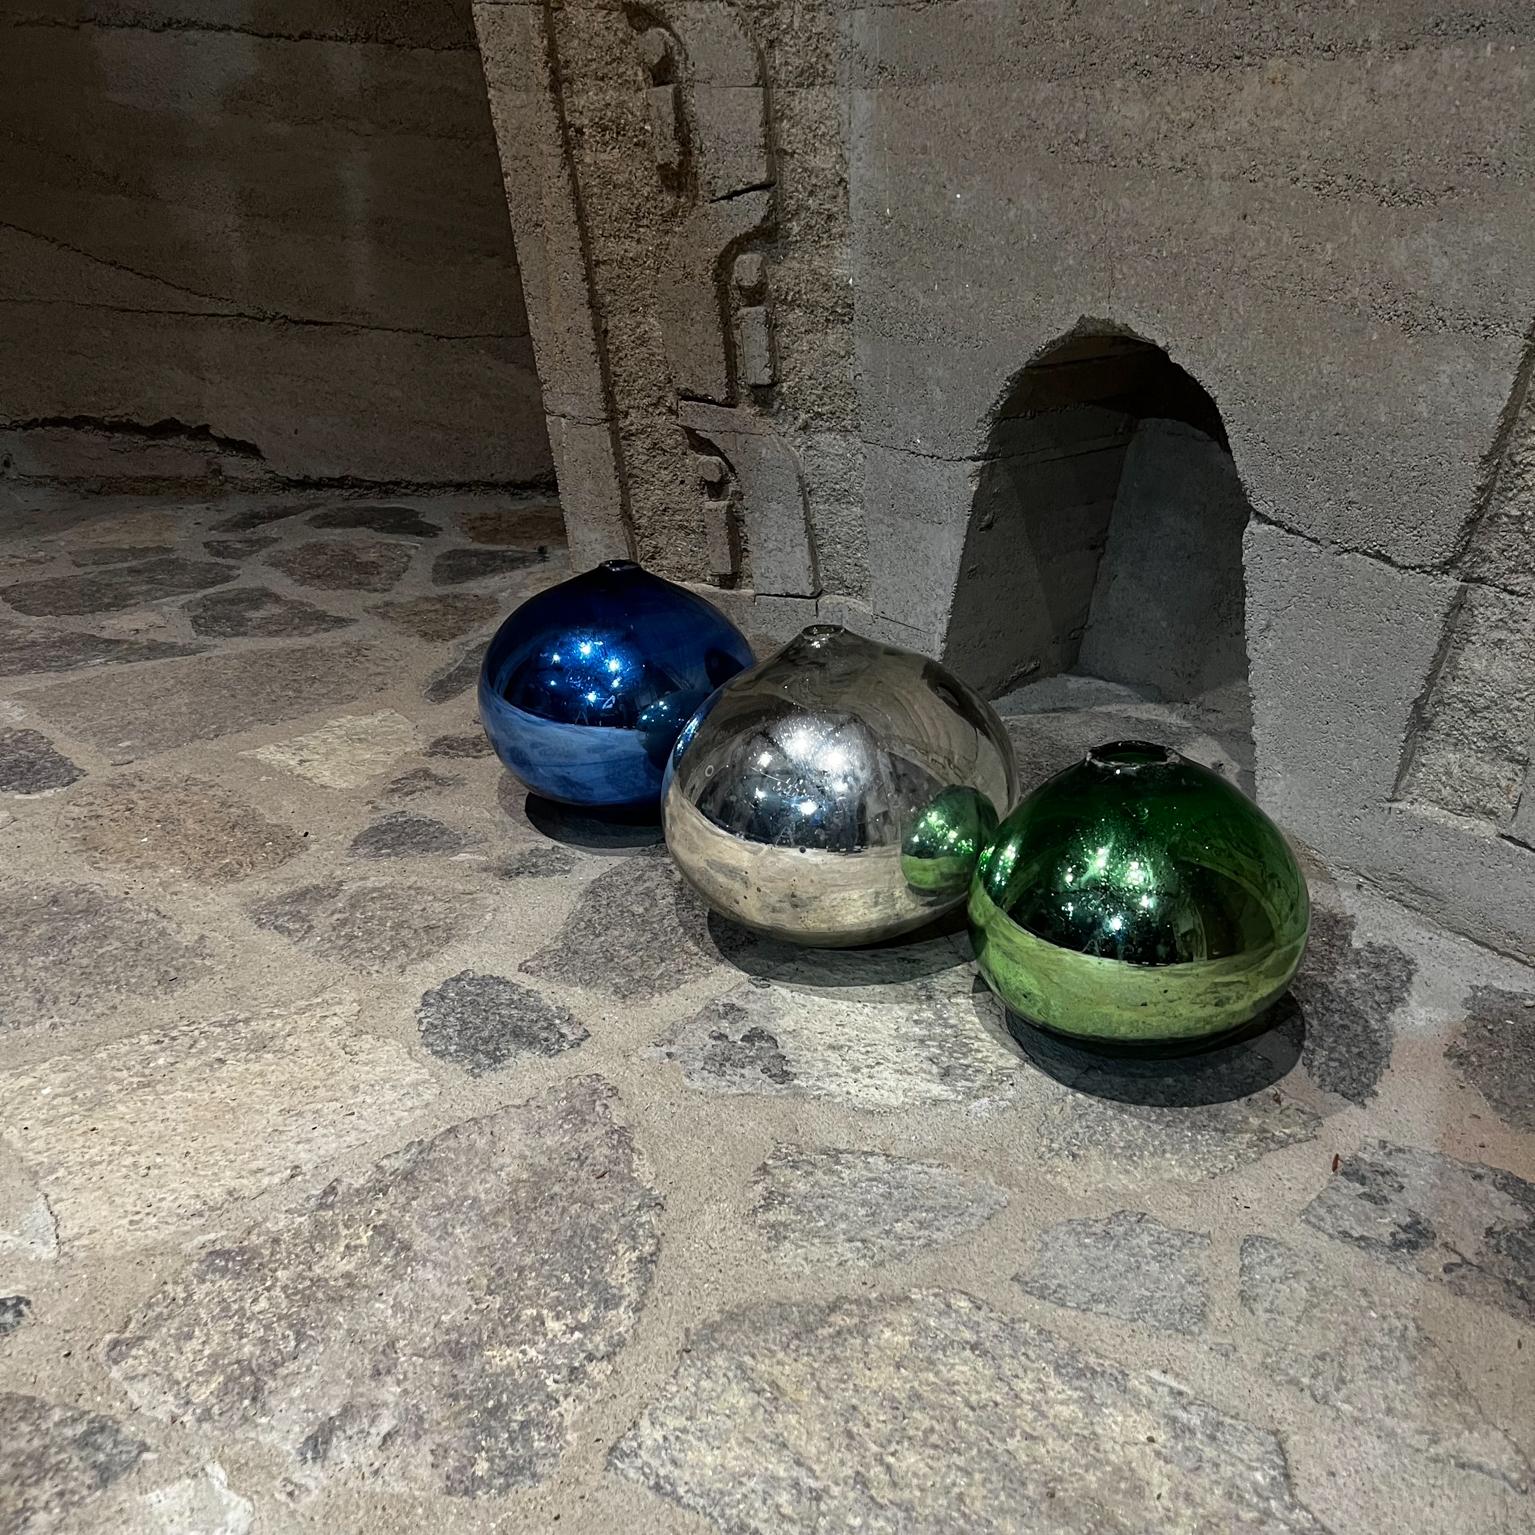 1960s Mexico three colorful globes gazing ball spheres hand blown mercury glass.
Measures: Green 8 tall x 8 diameter silver 10 tall x 10 diameter blue 9 tall x 9 diameter.
Set of 3 mercury colored glass spheres. Crafted in hand blown glass.
No